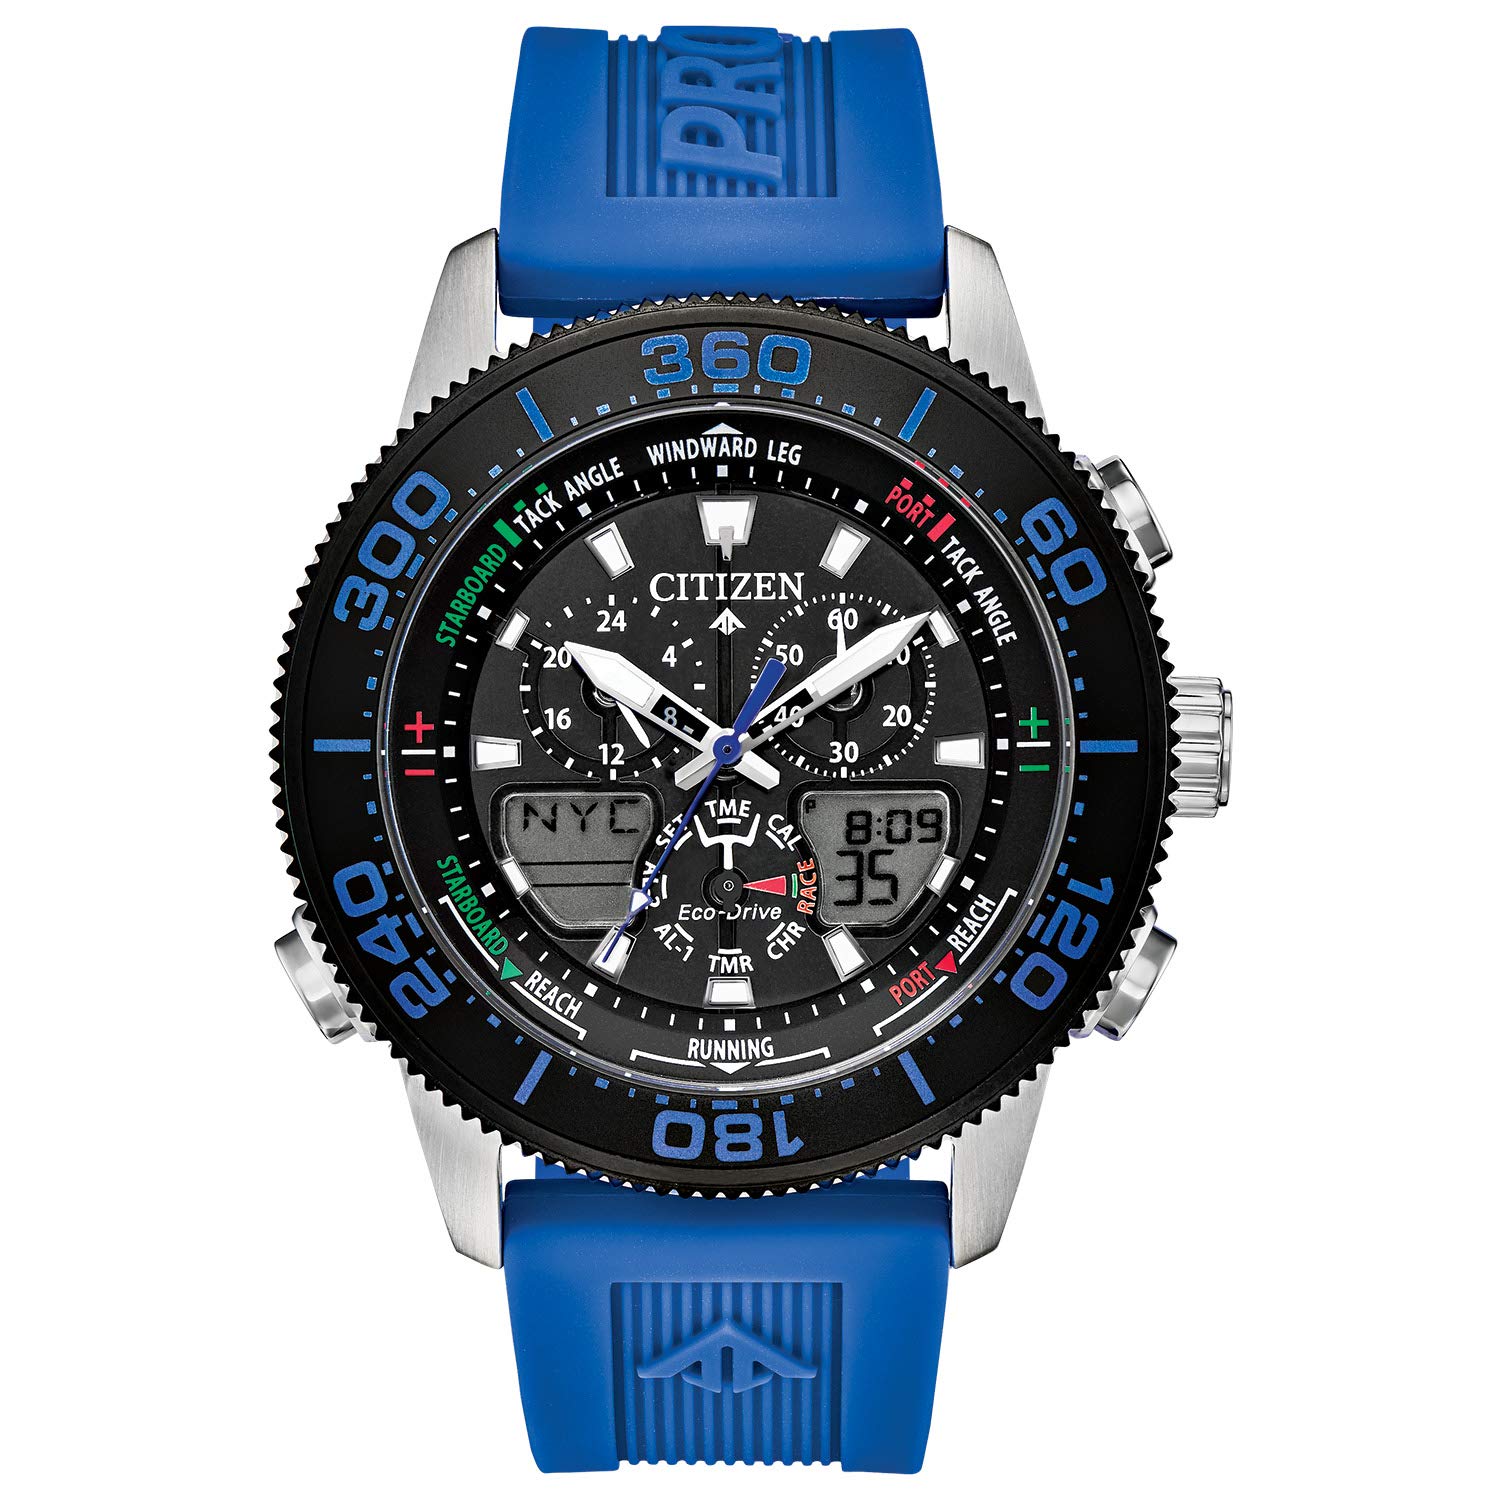 Citizen Men's Promaster Sailhawk Eco-Drive Watch, Yacht Racing Timer, Chronograph, Polyurethane Strap, Dual-Time, Analog/ Digital Times, Luminous Hands and Markers